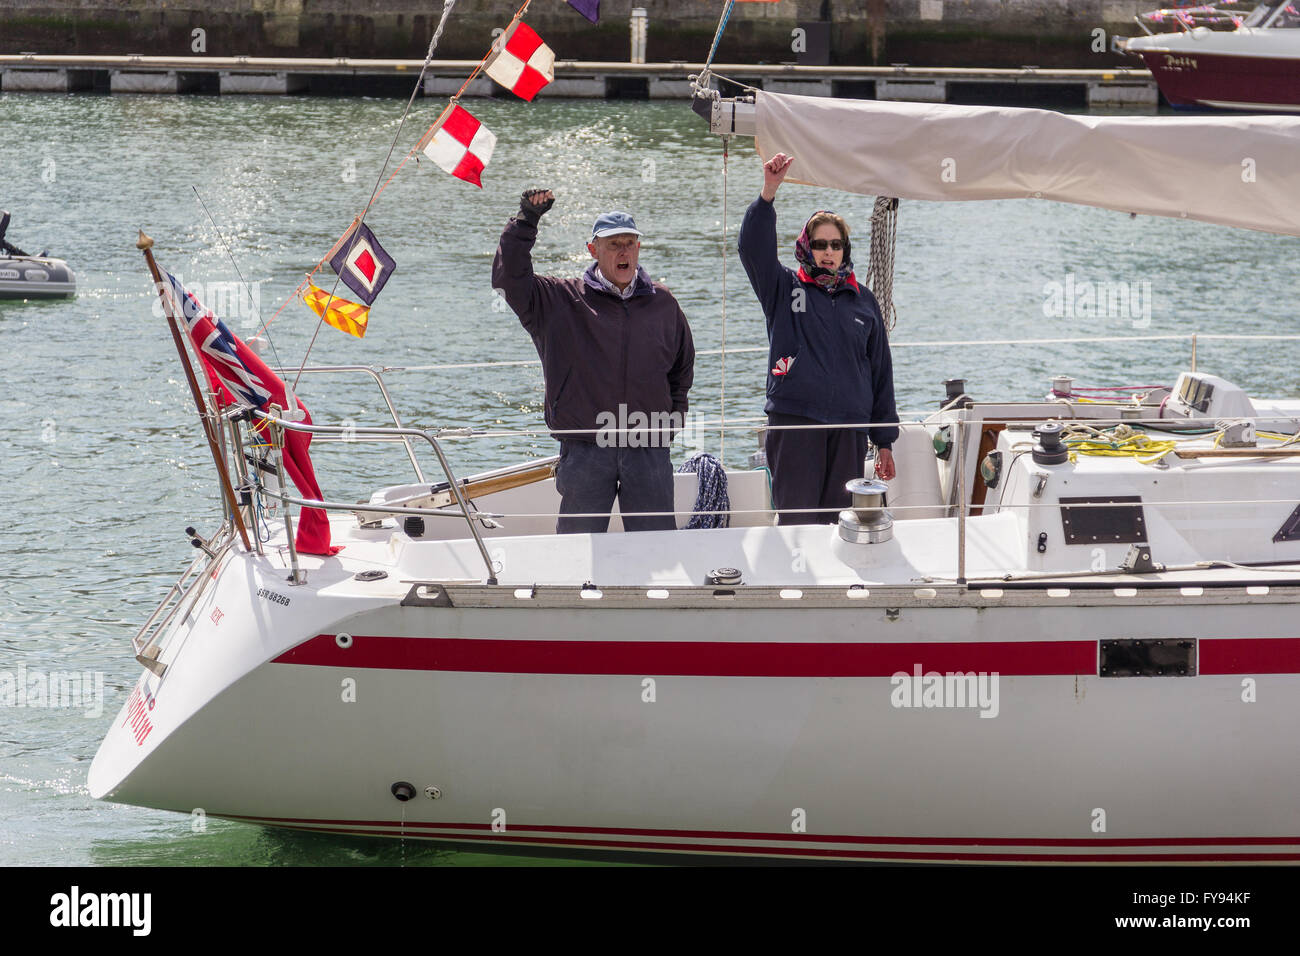 Weymouth, England. 23 April 2016. Queen's 90th Birthday Floating Tribute. People cheering on white boat. Credit:  Frances Underwood/Alamy Live News Stock Photo